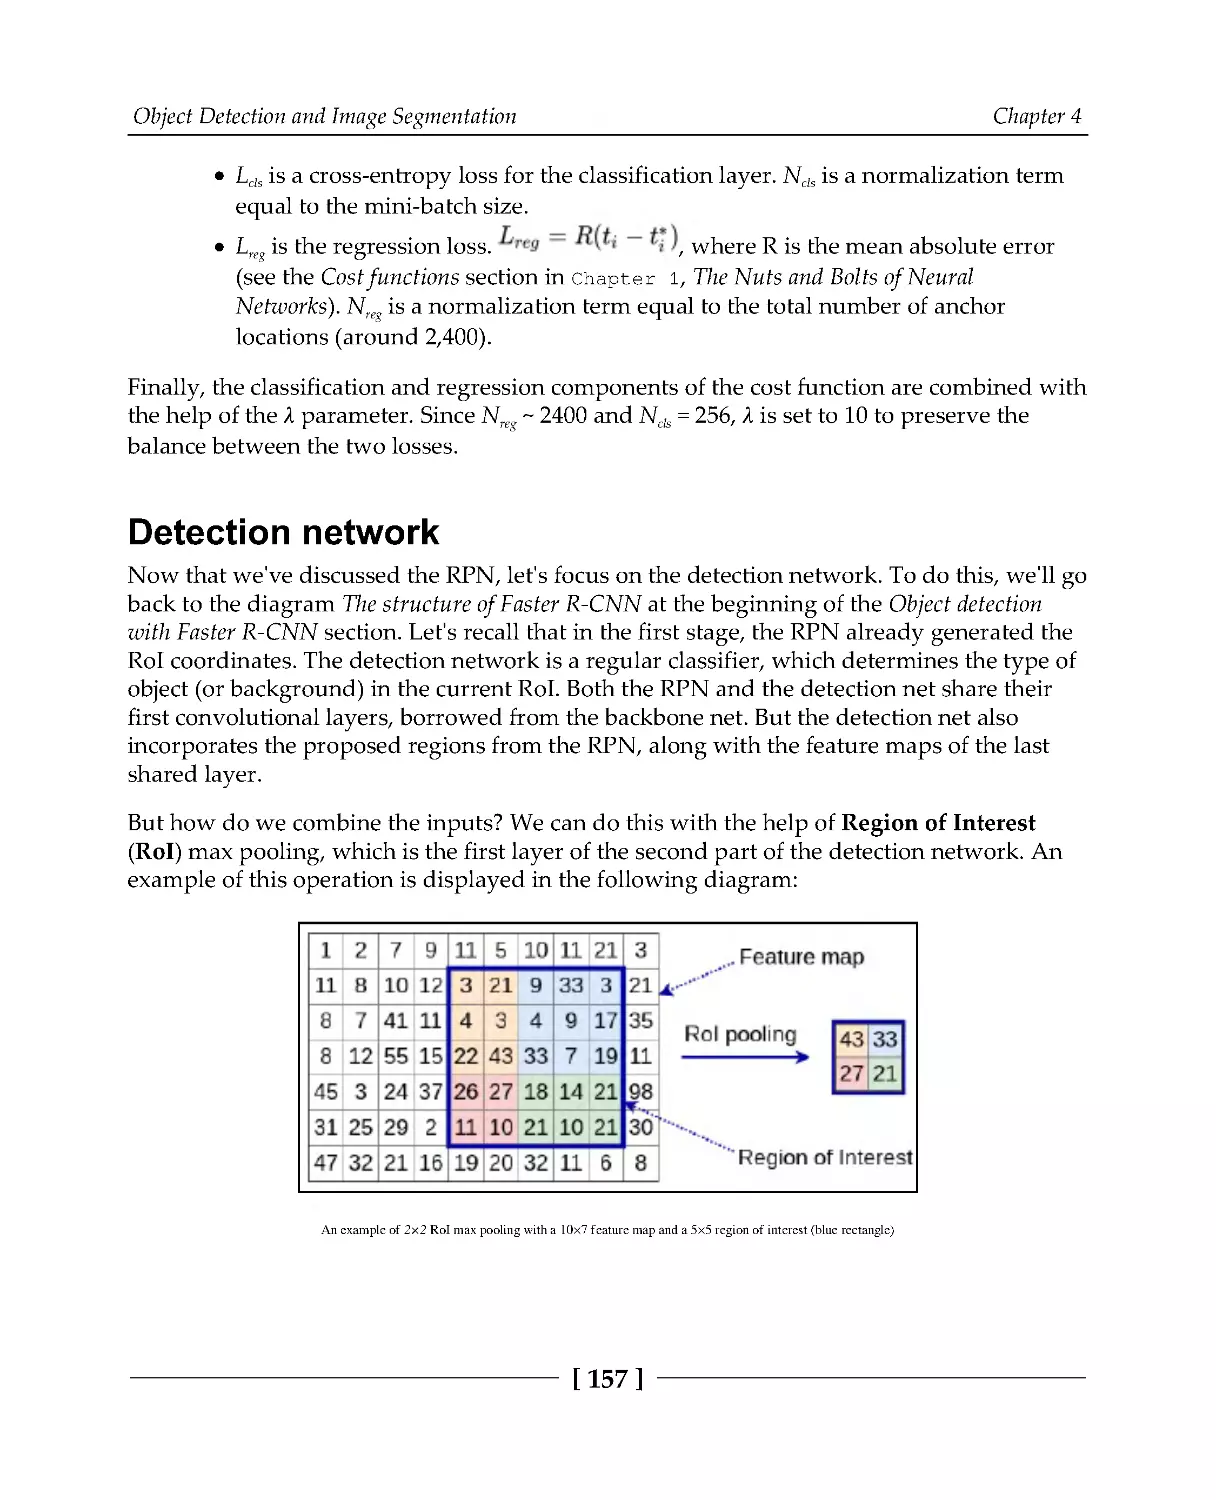 Detection network